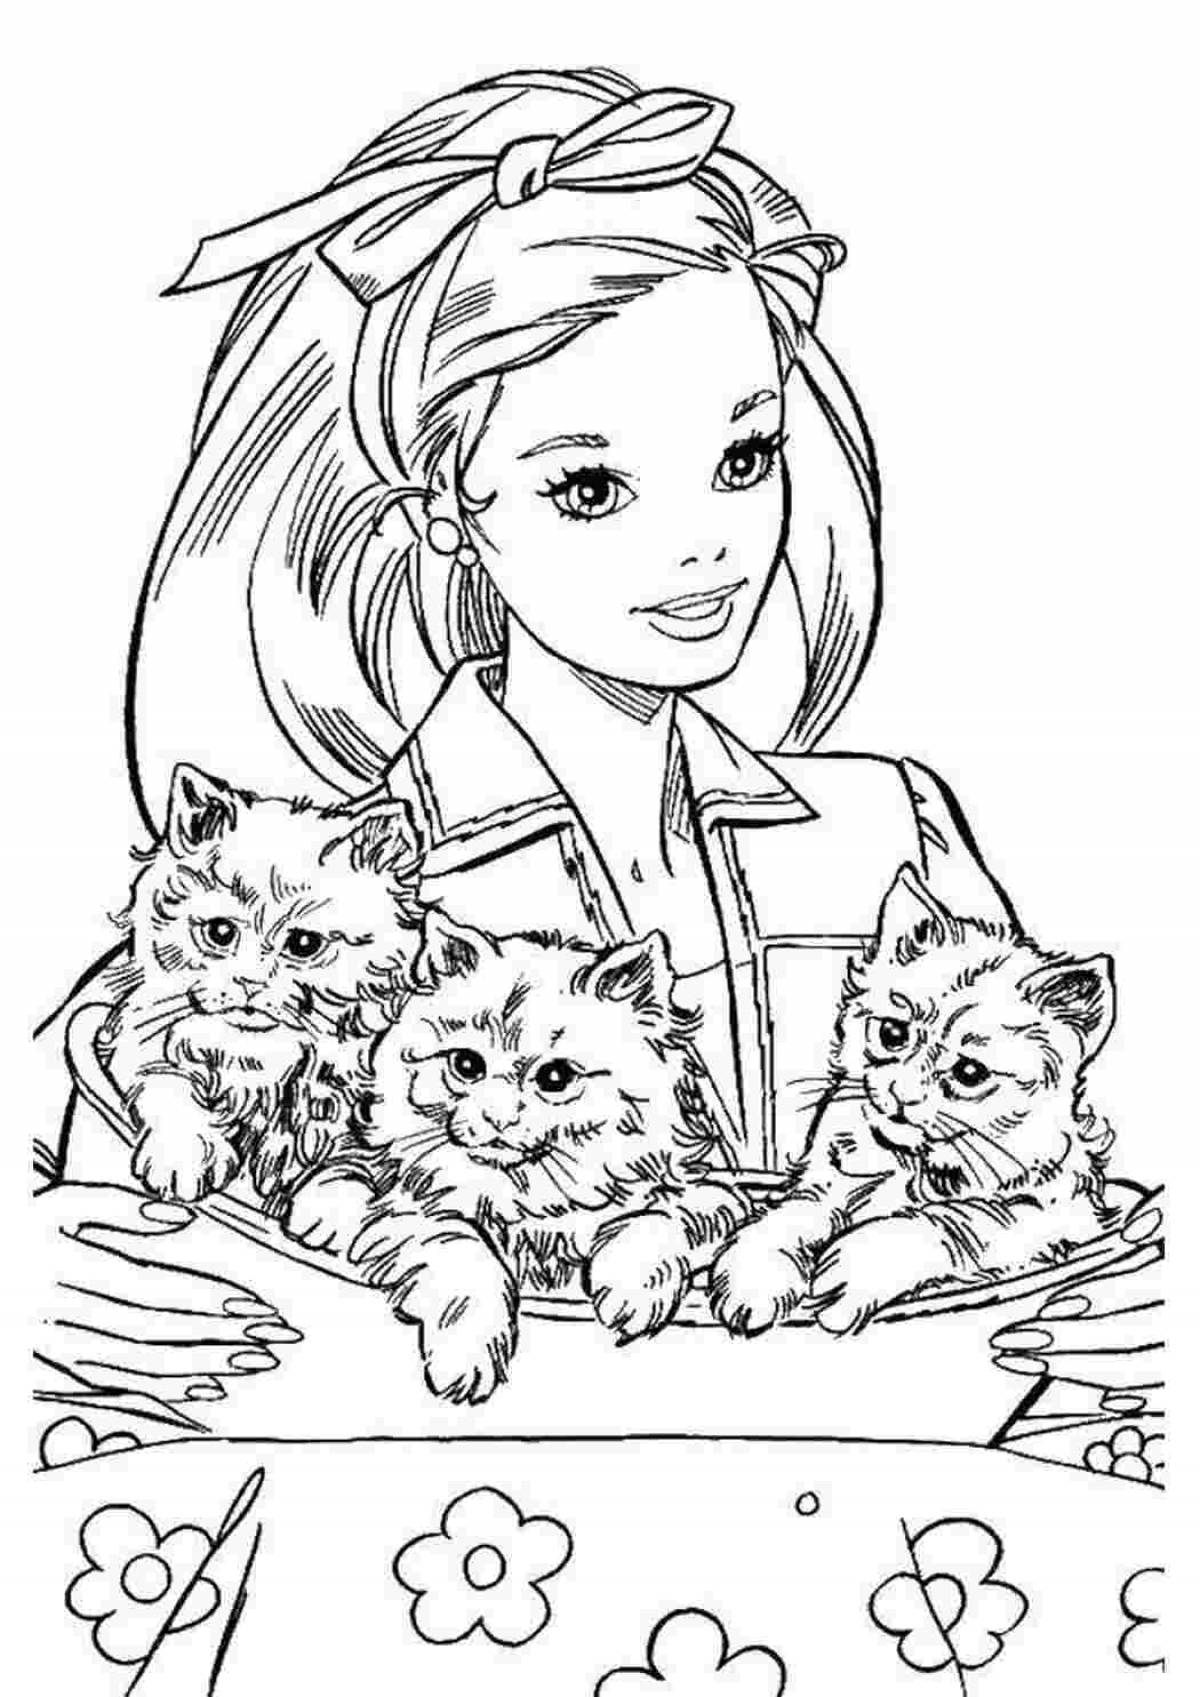 Charming barbie coloring book with kitten